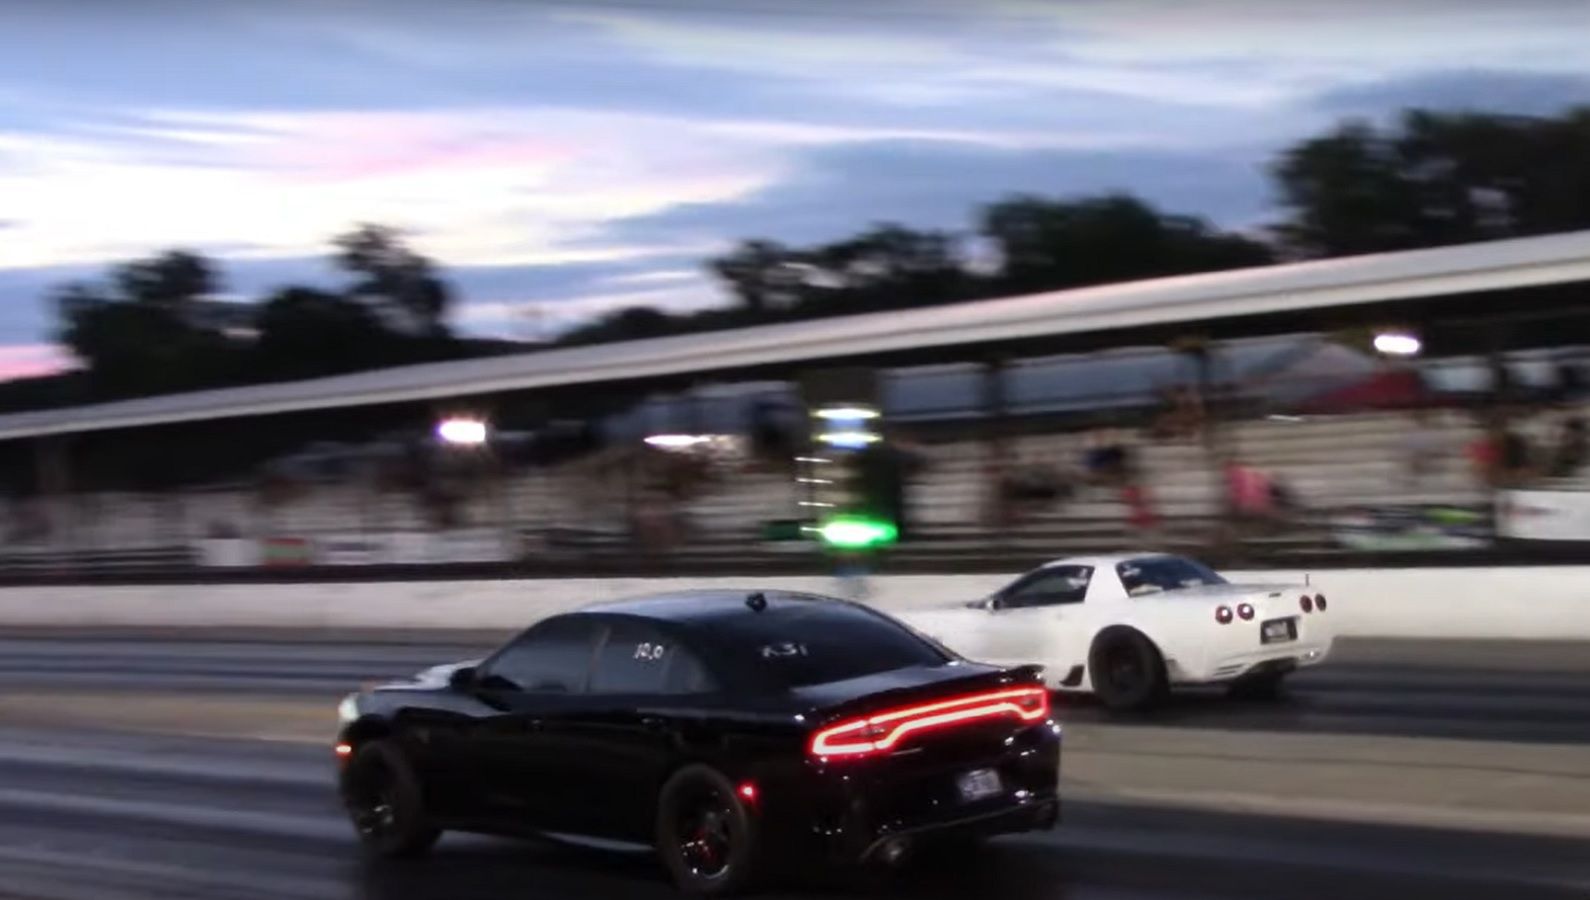 Watch A C5 Chevrolet Corvette Destroy The Competition In An All